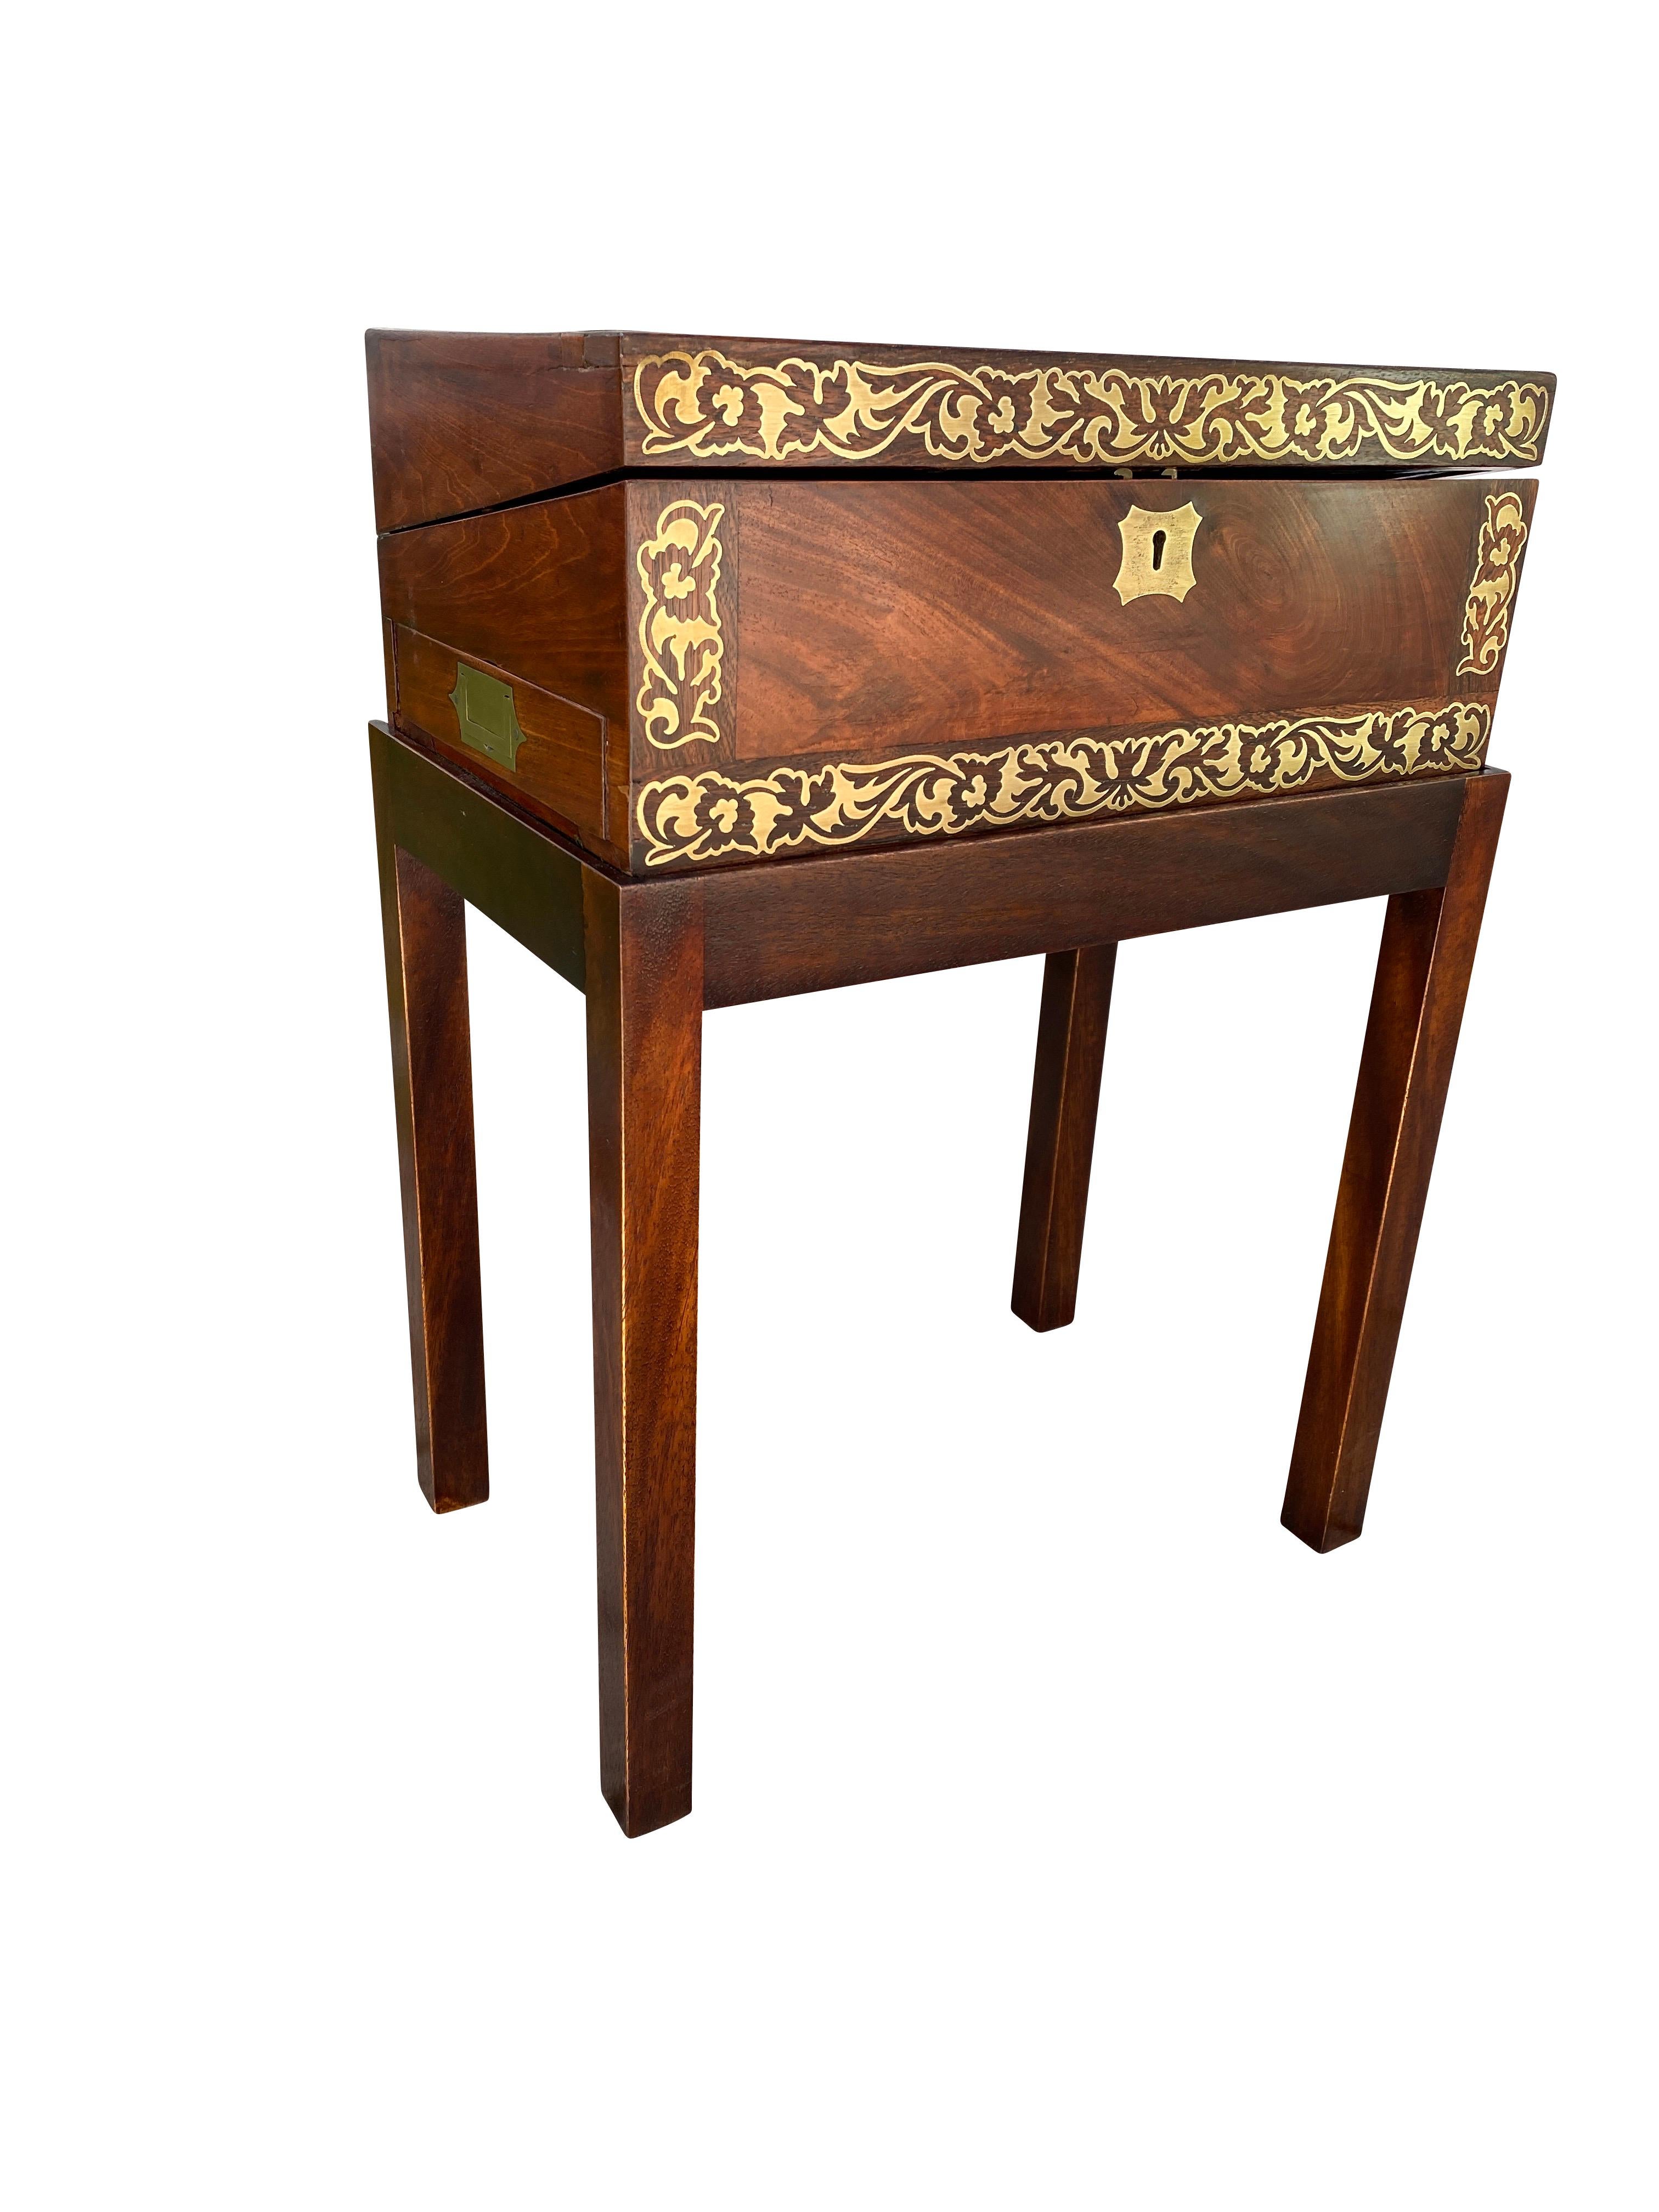 In fine condition with brass inlaid banded hinged top and fitted interior, side drawer; sides similarly decorated and raised on a base with square section legs.